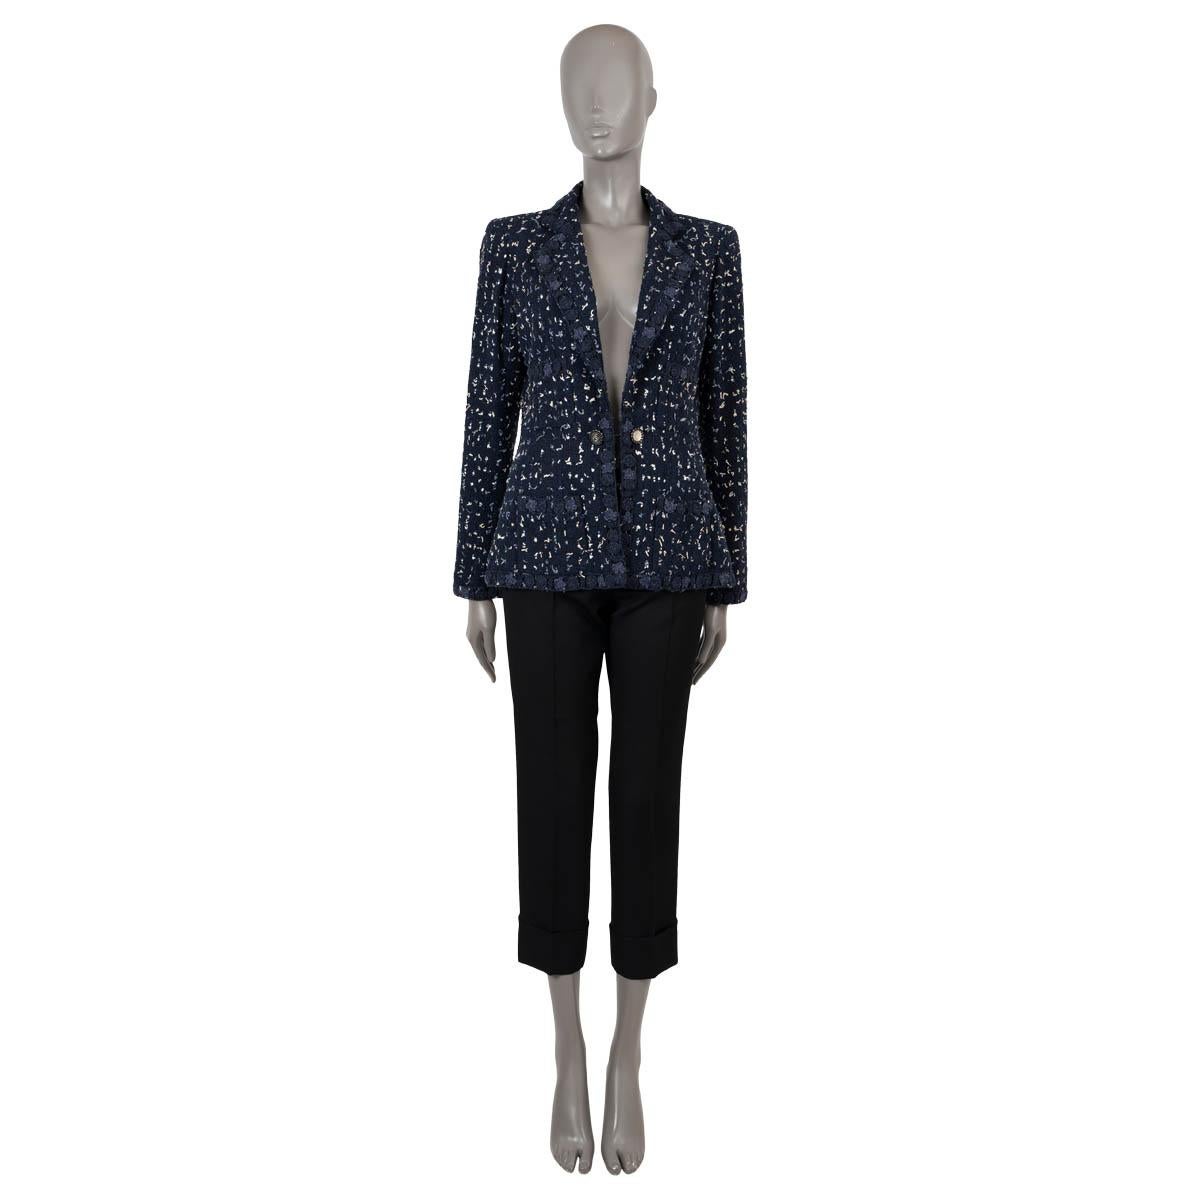 100% authentic Chanel tweed jacket in navy blue cotton (53%), polyamide (33%) and viscose (14%) with white and light blue mini fringe. Features a tailored silhouette, peak lapel, four patch pockets and Camellia application trim. Closes with a silver